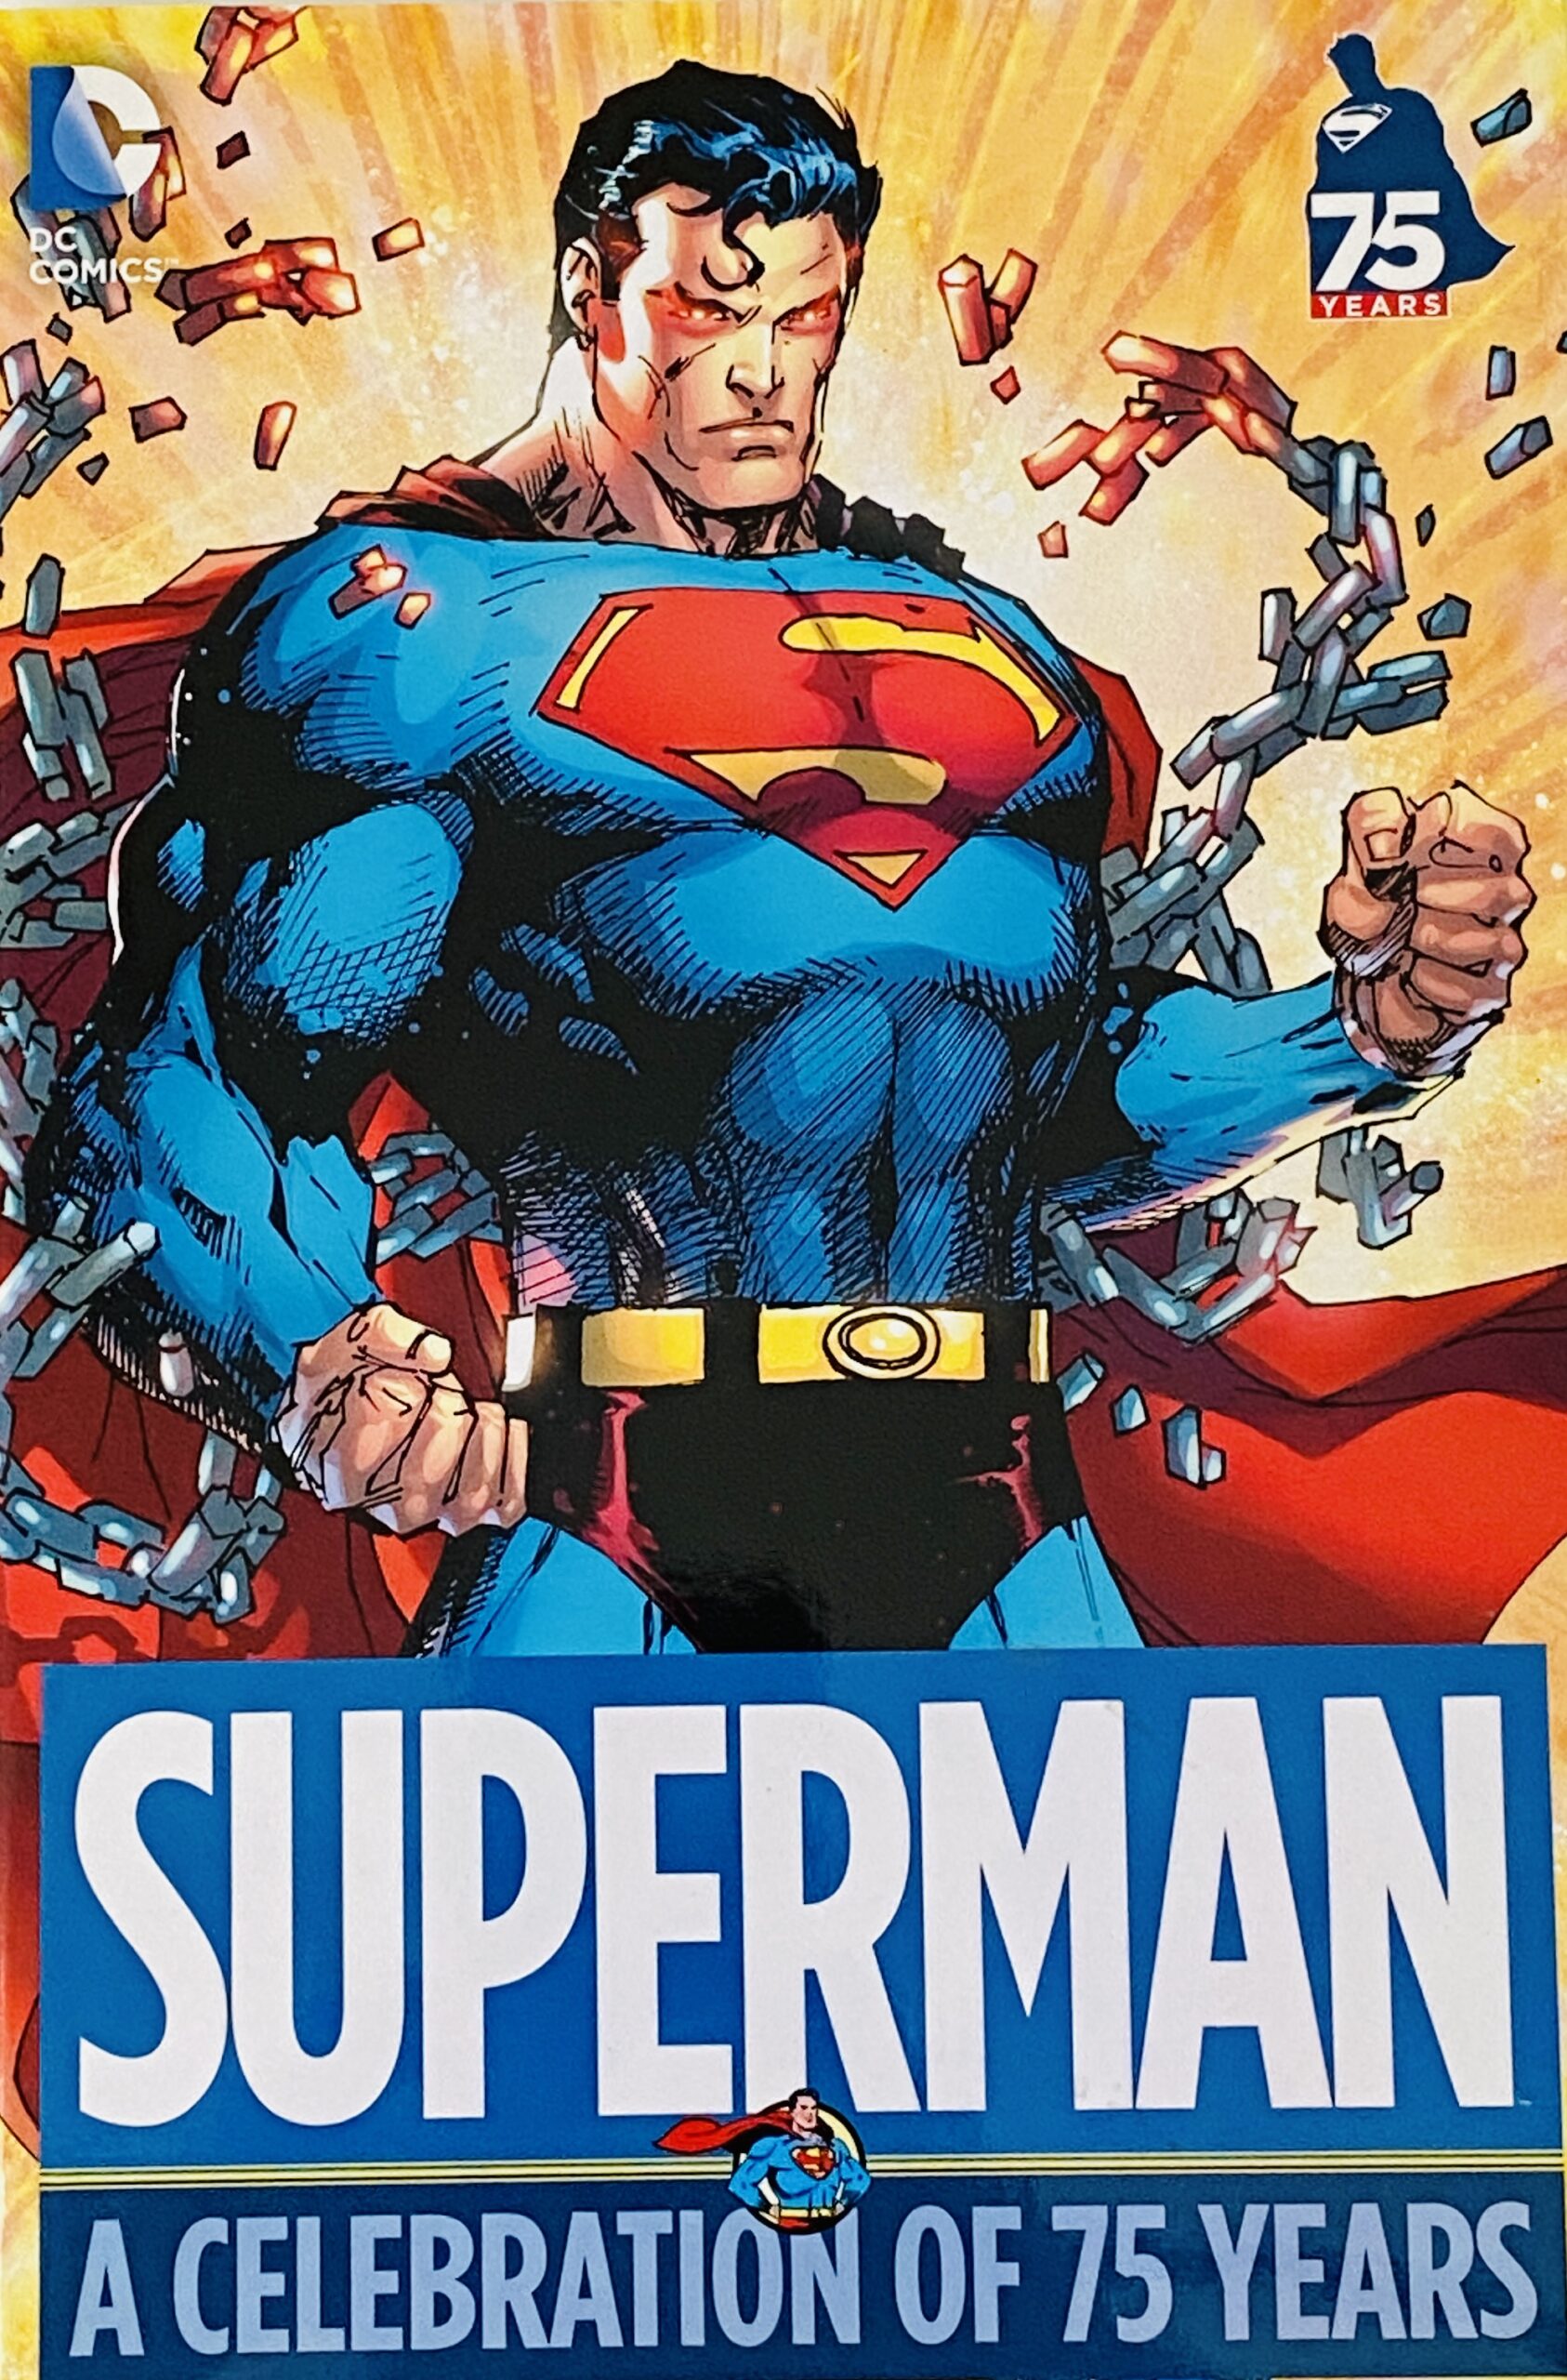 SUPERMAN A Celebration of 75 Years – Only Superheroes